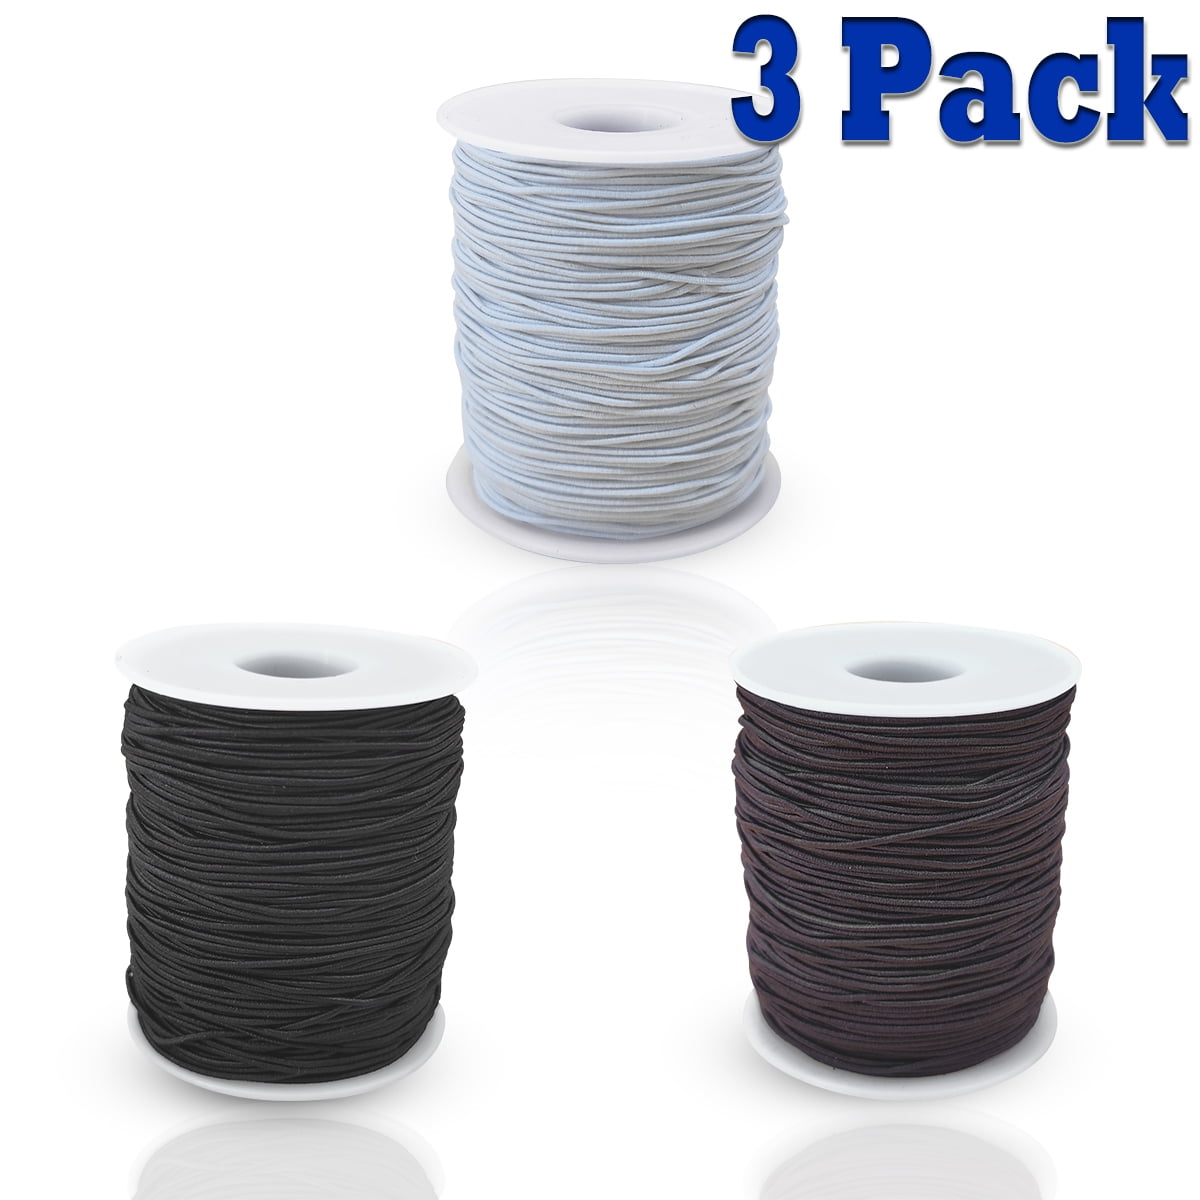 Paxcoo 1mm Elastic Bracelet String Cord Stretch Bead Cord for